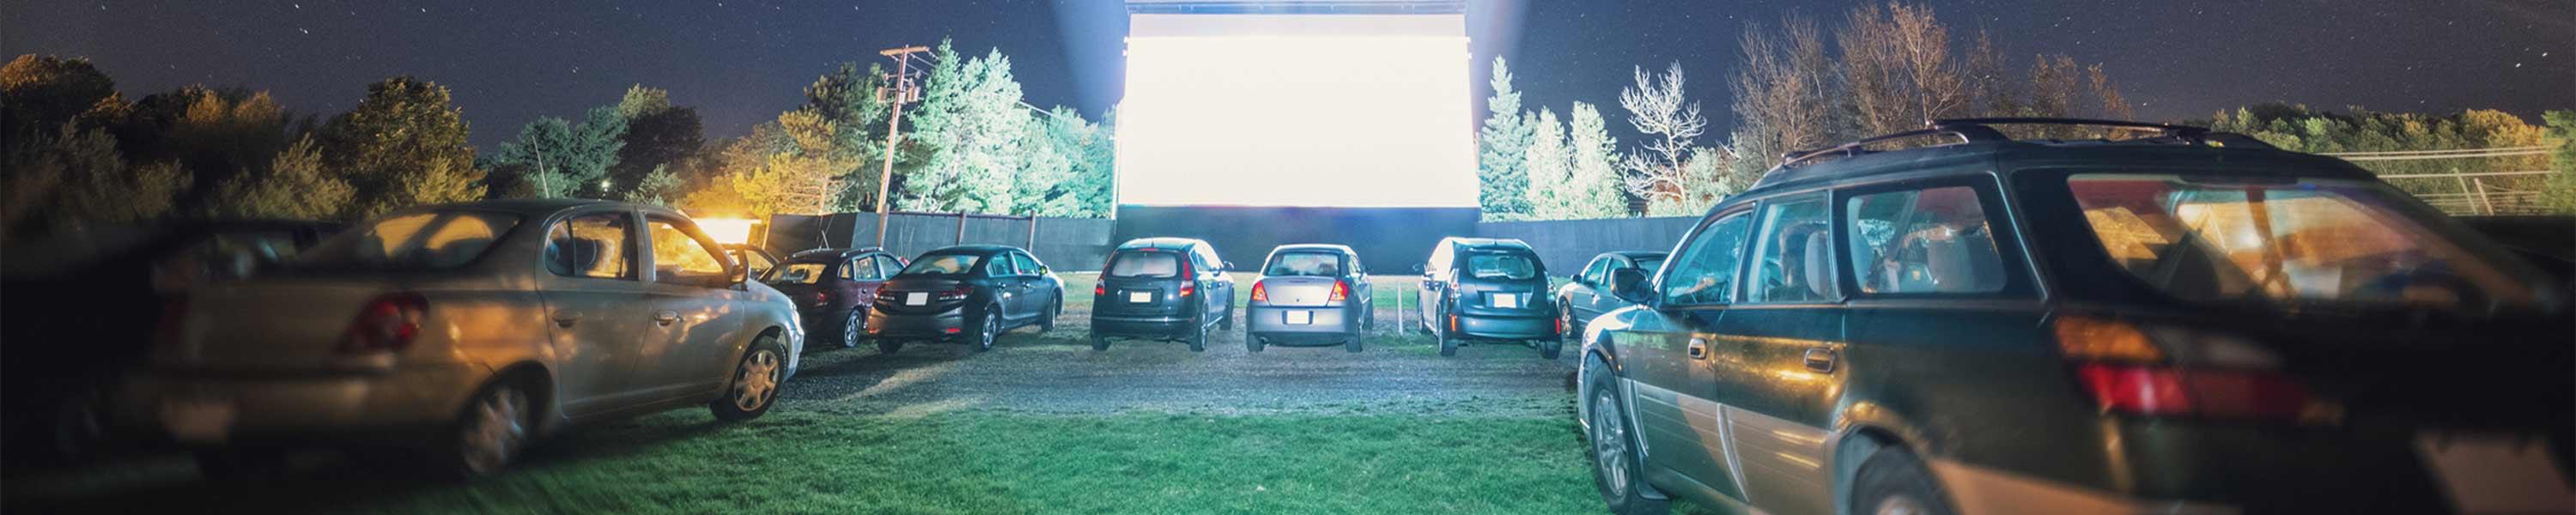 Cars at the drive-in